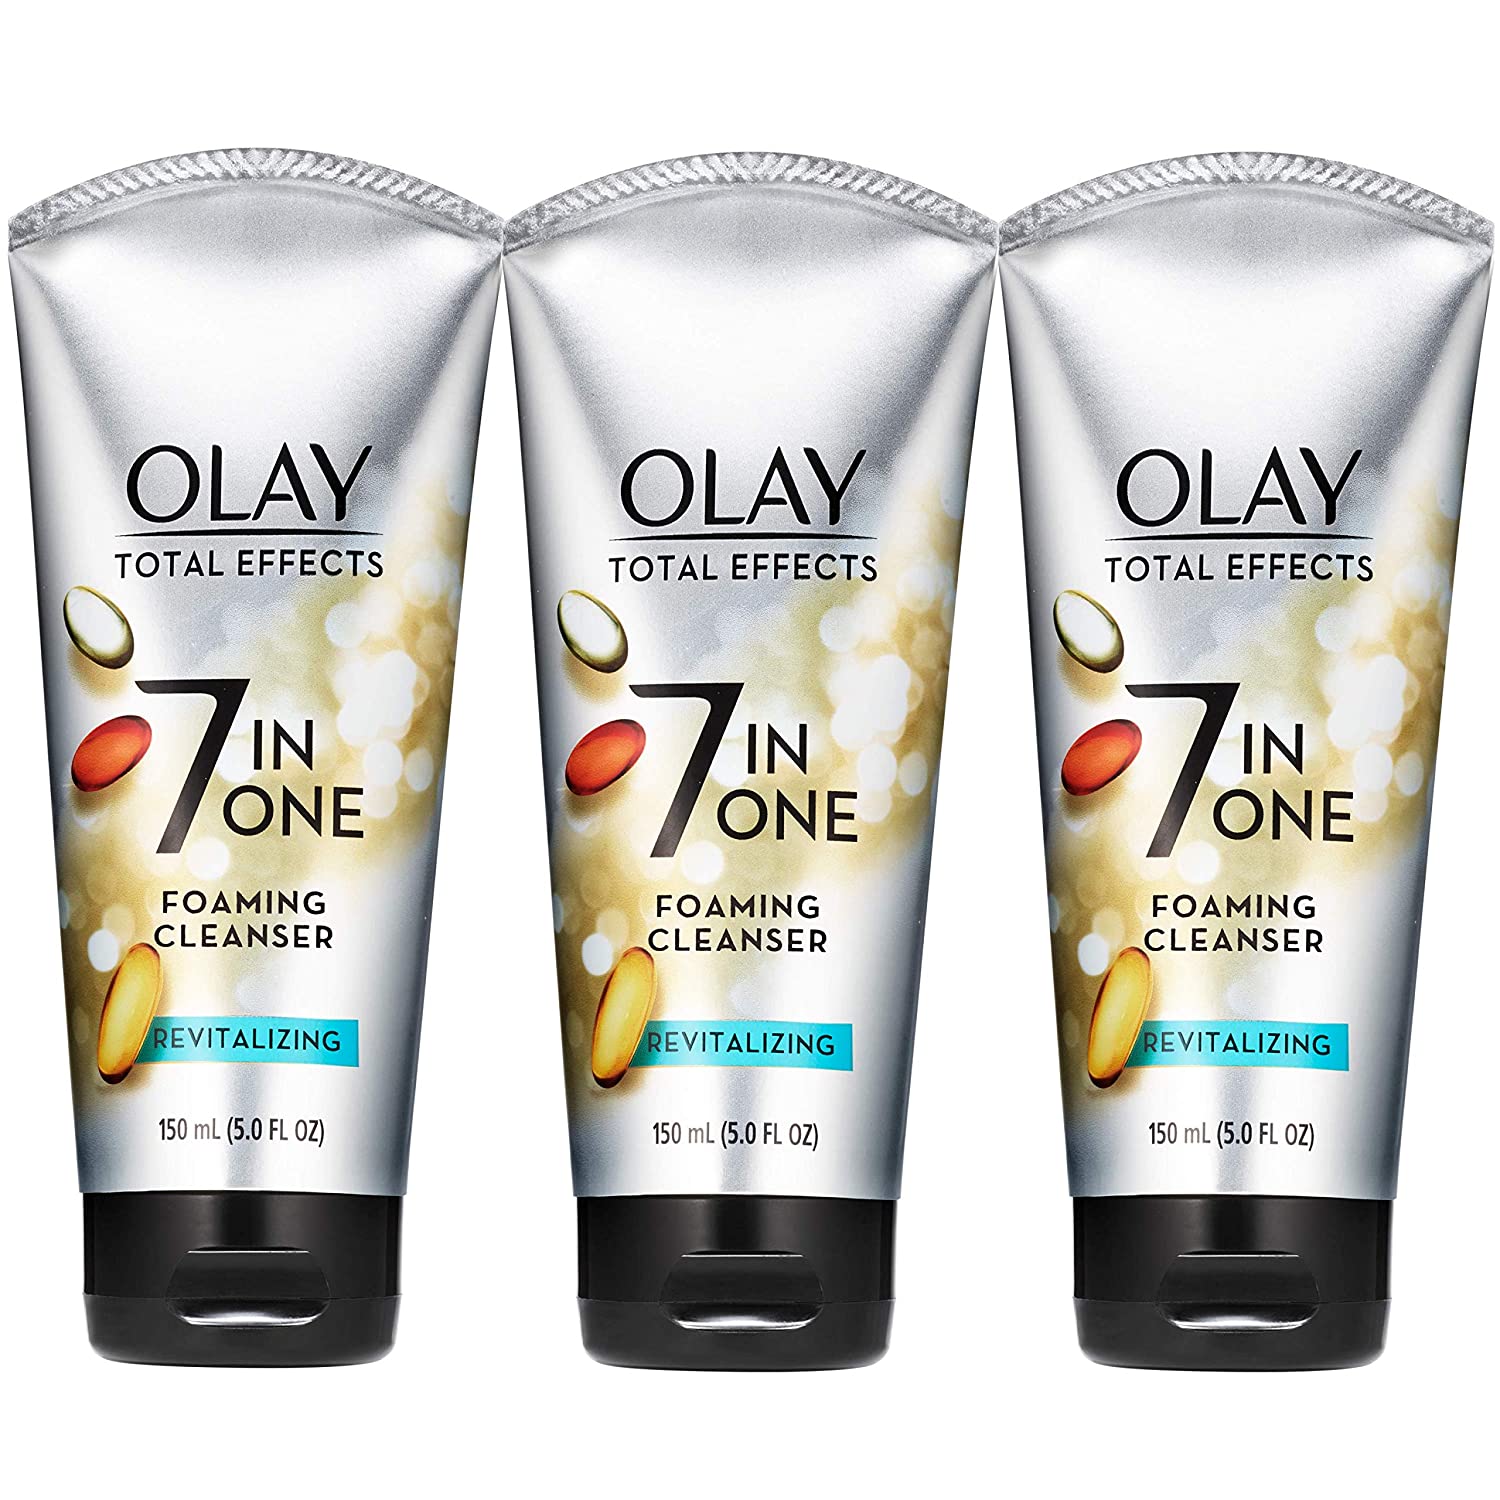 3-pack of 5oz Olay Total Effects Revitalizing Foaming Facial Cleanser $6.28 @ Amazon